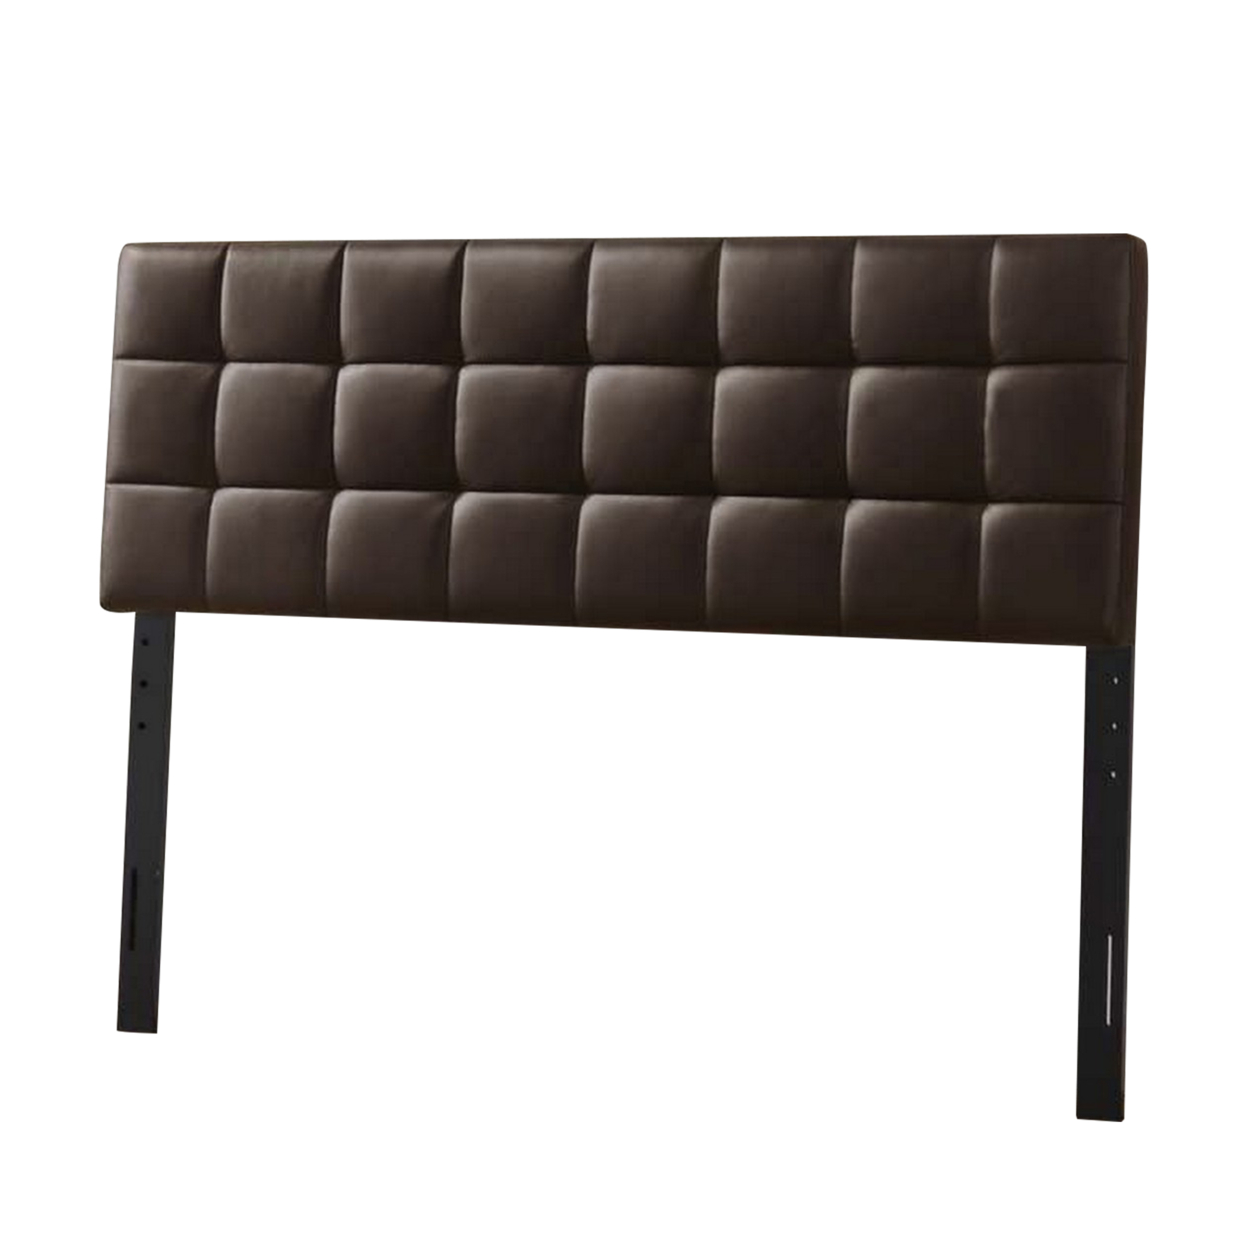 Faux Leather Upholstered Twin Size Headboard With Square Tufting, Brown- Saltoro Sherpi